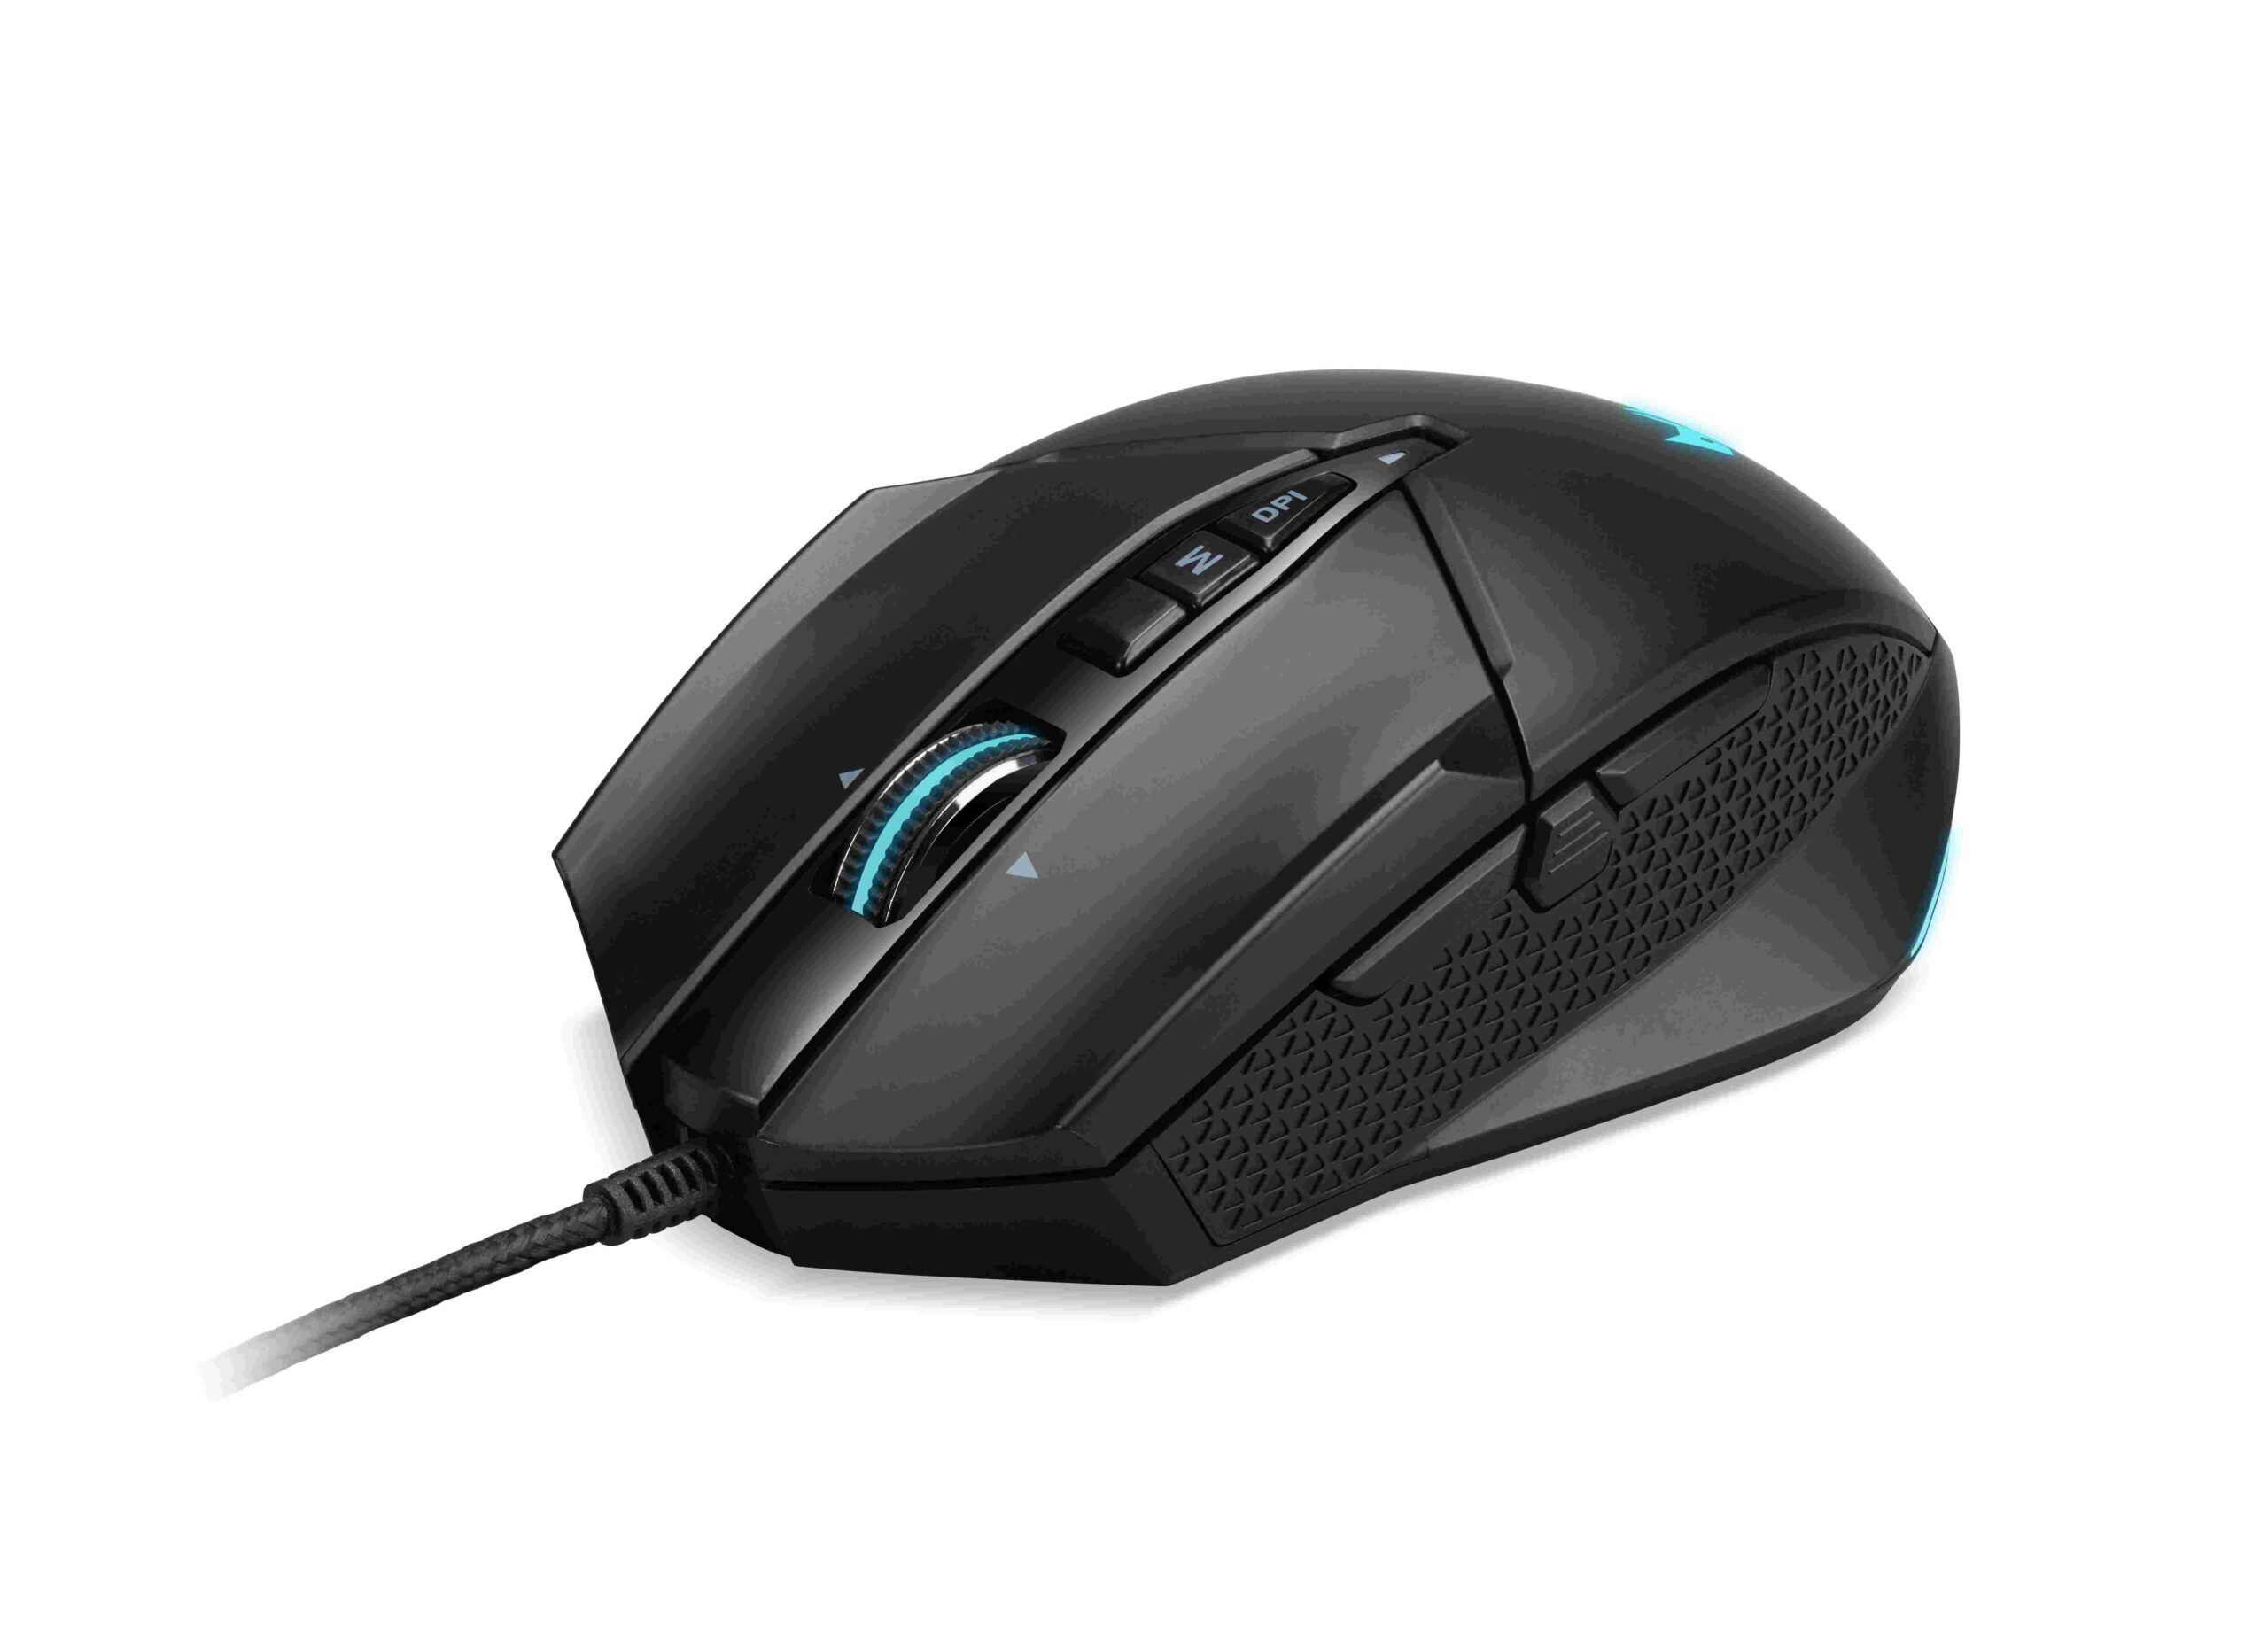 Acer Predator Cestus 335 and 315 Gaming Mouse Revealed with New Nitro Keyboard and Mouse